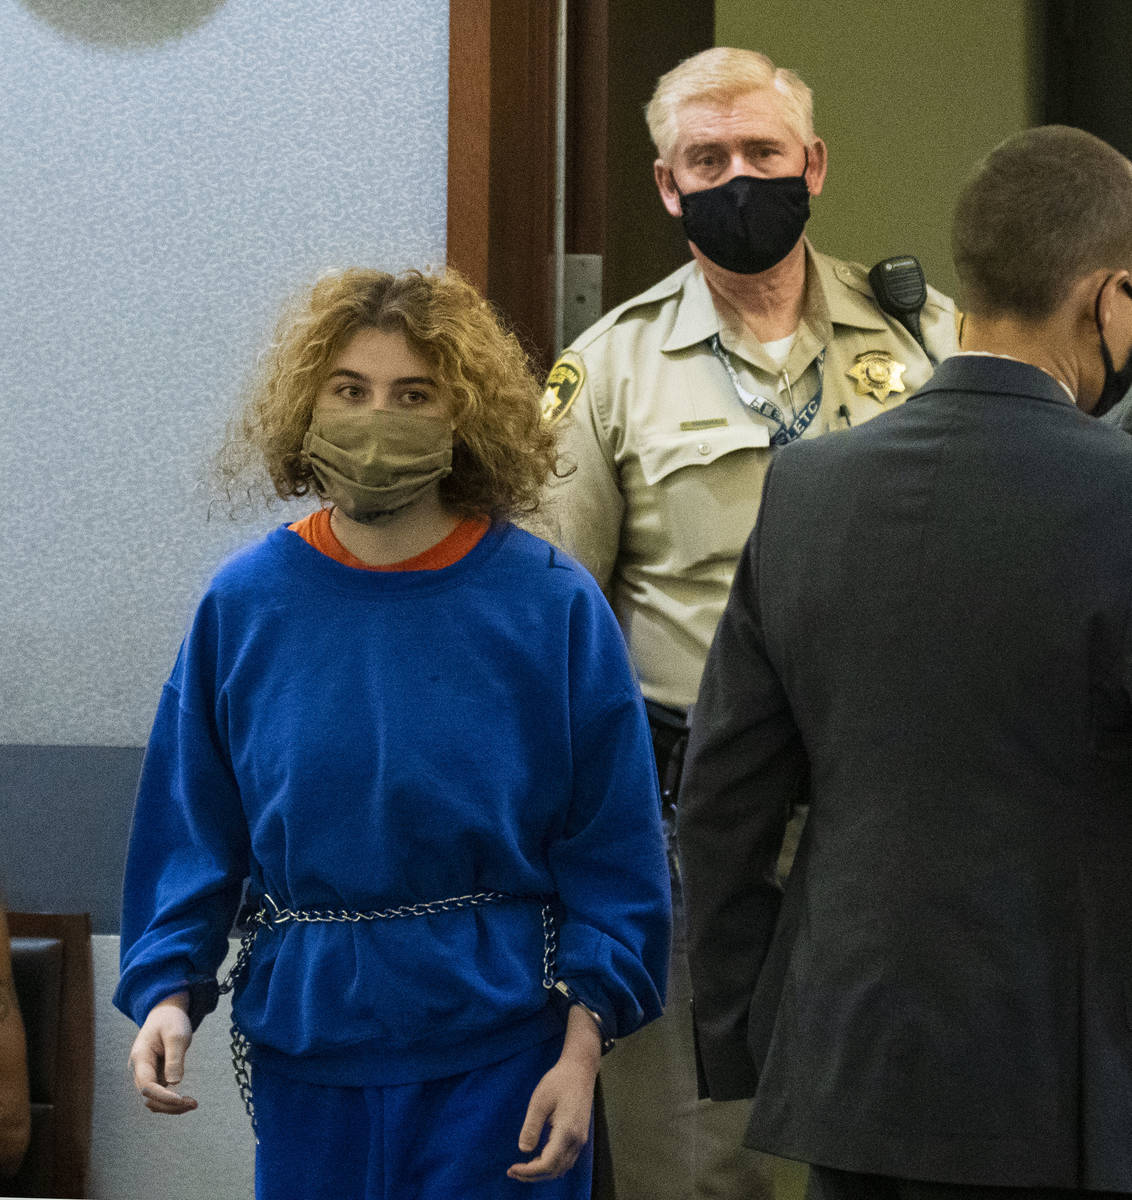 Sierra Halseth, charged in the killing of her father, Daniel Halseth, is led into the courtroom ...